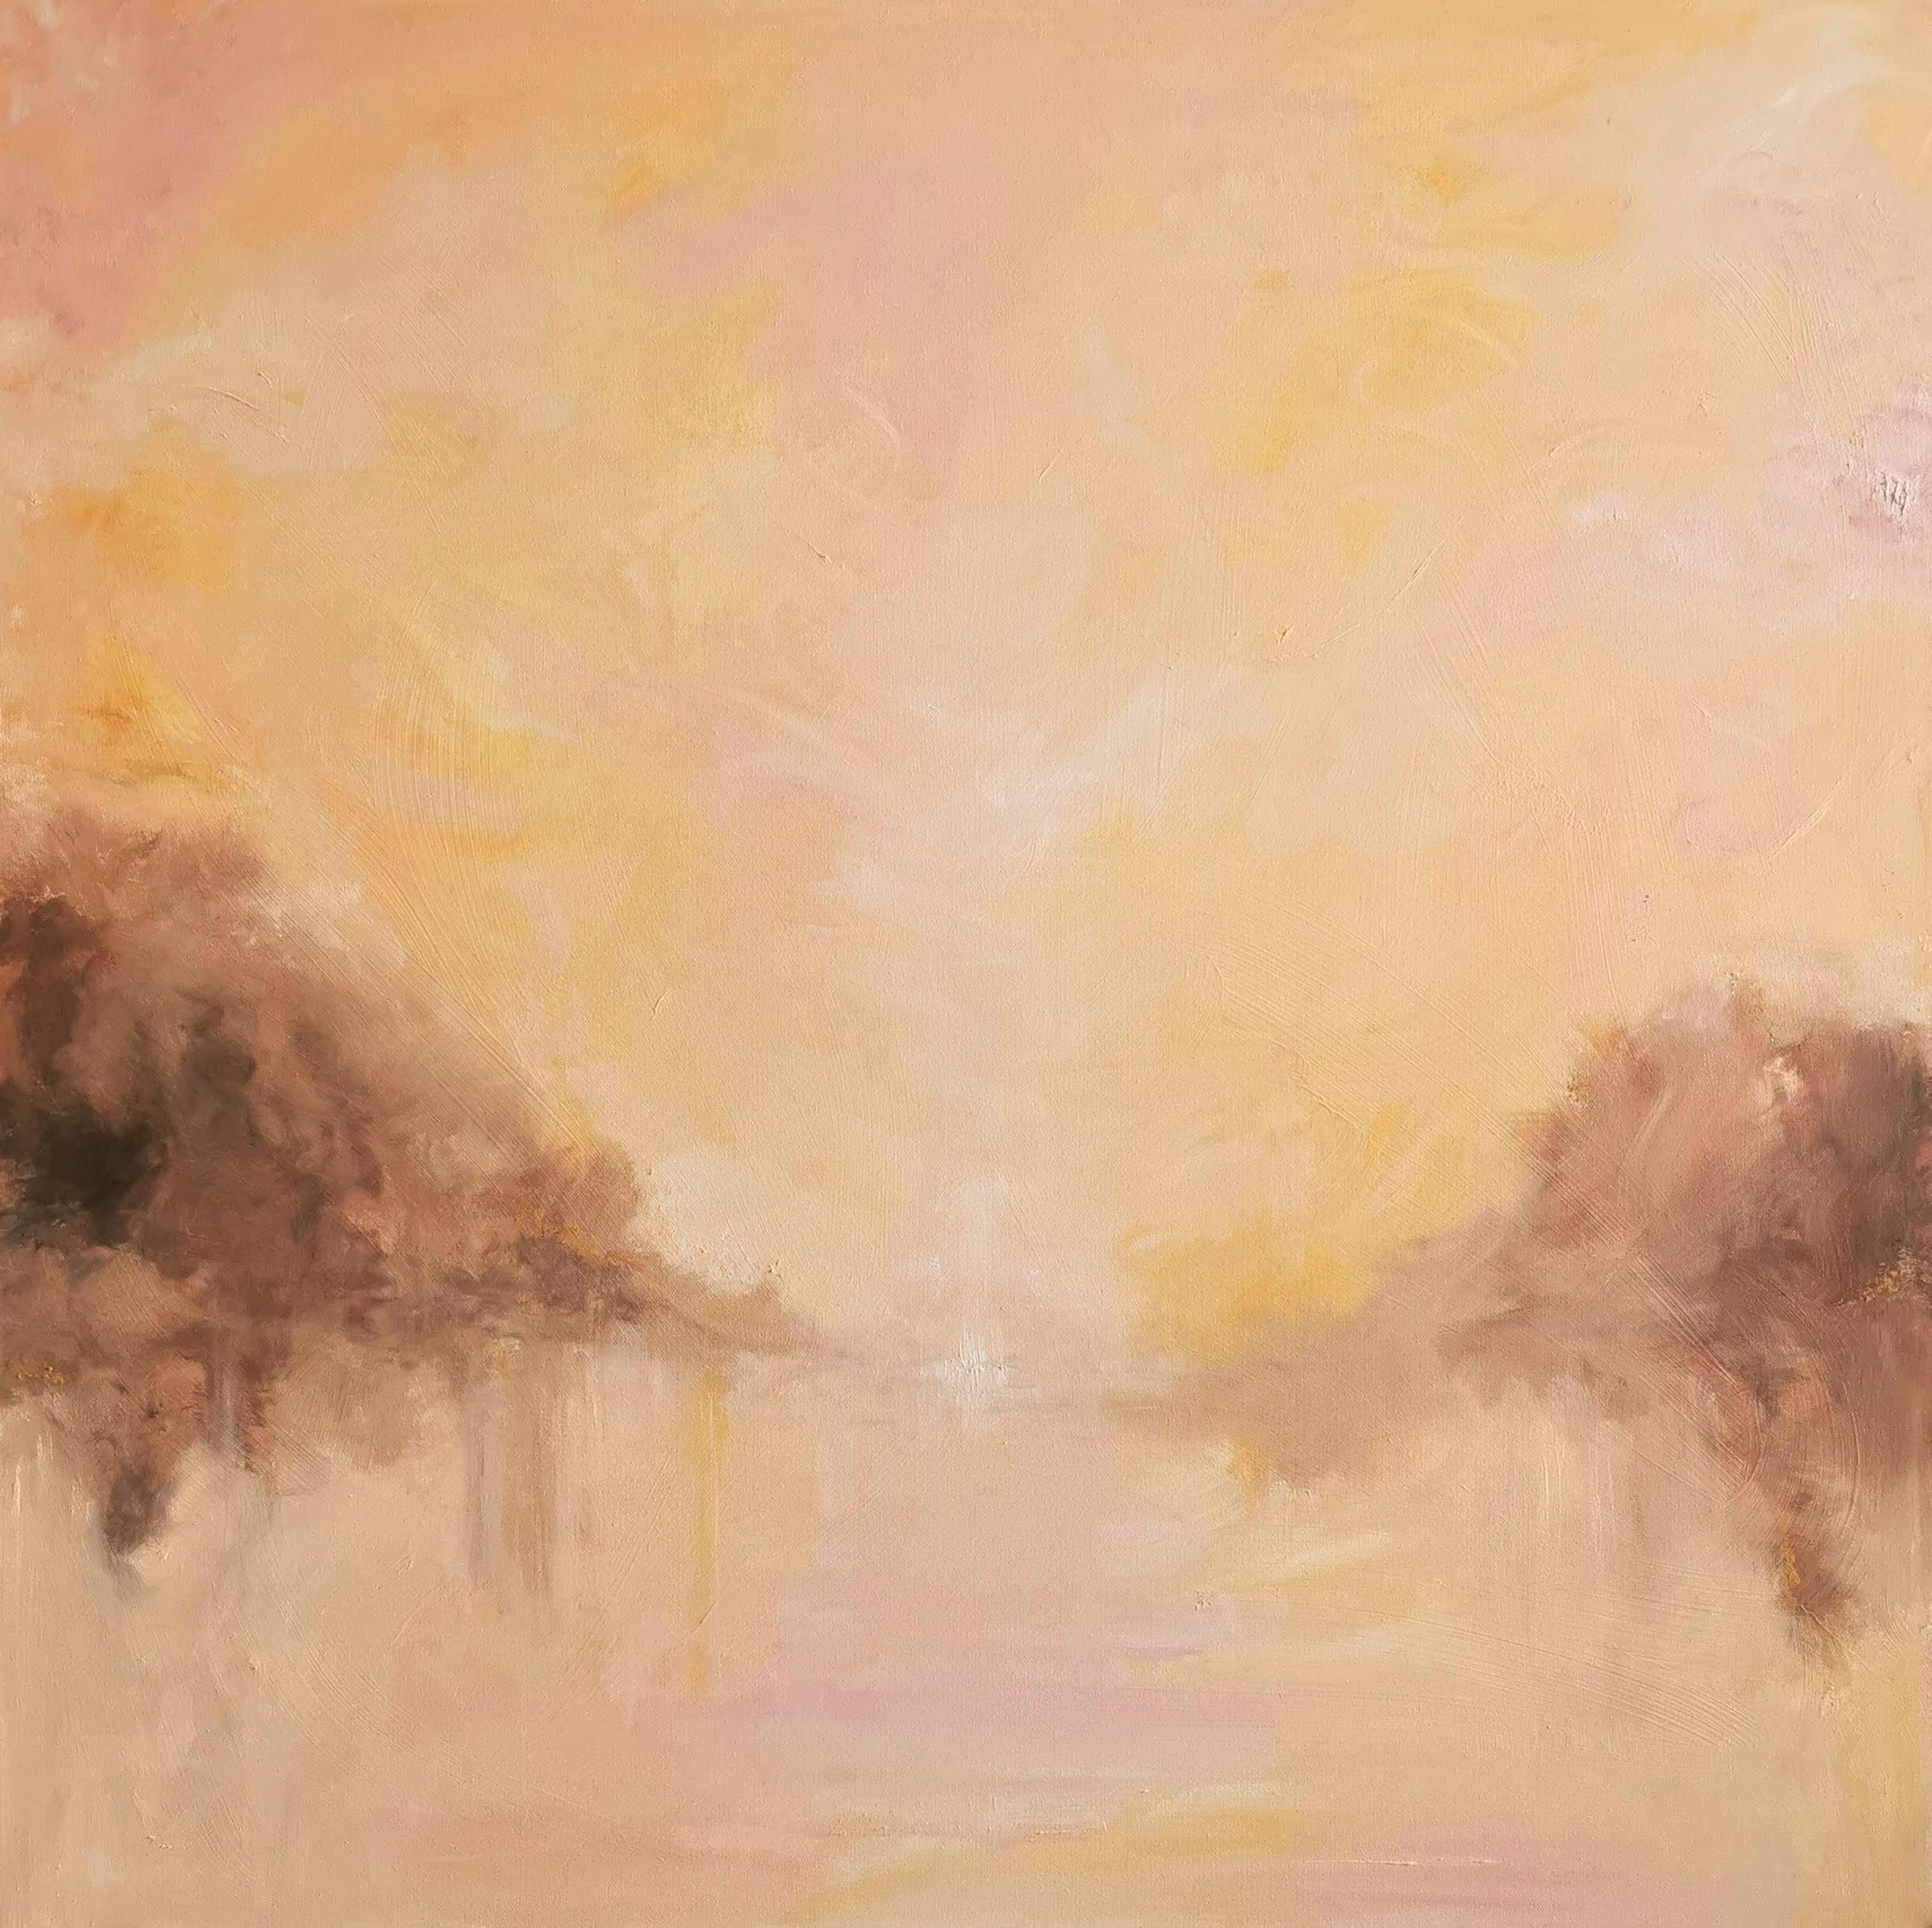 Grand rising - Large peach fuzz color abstract landscape painting